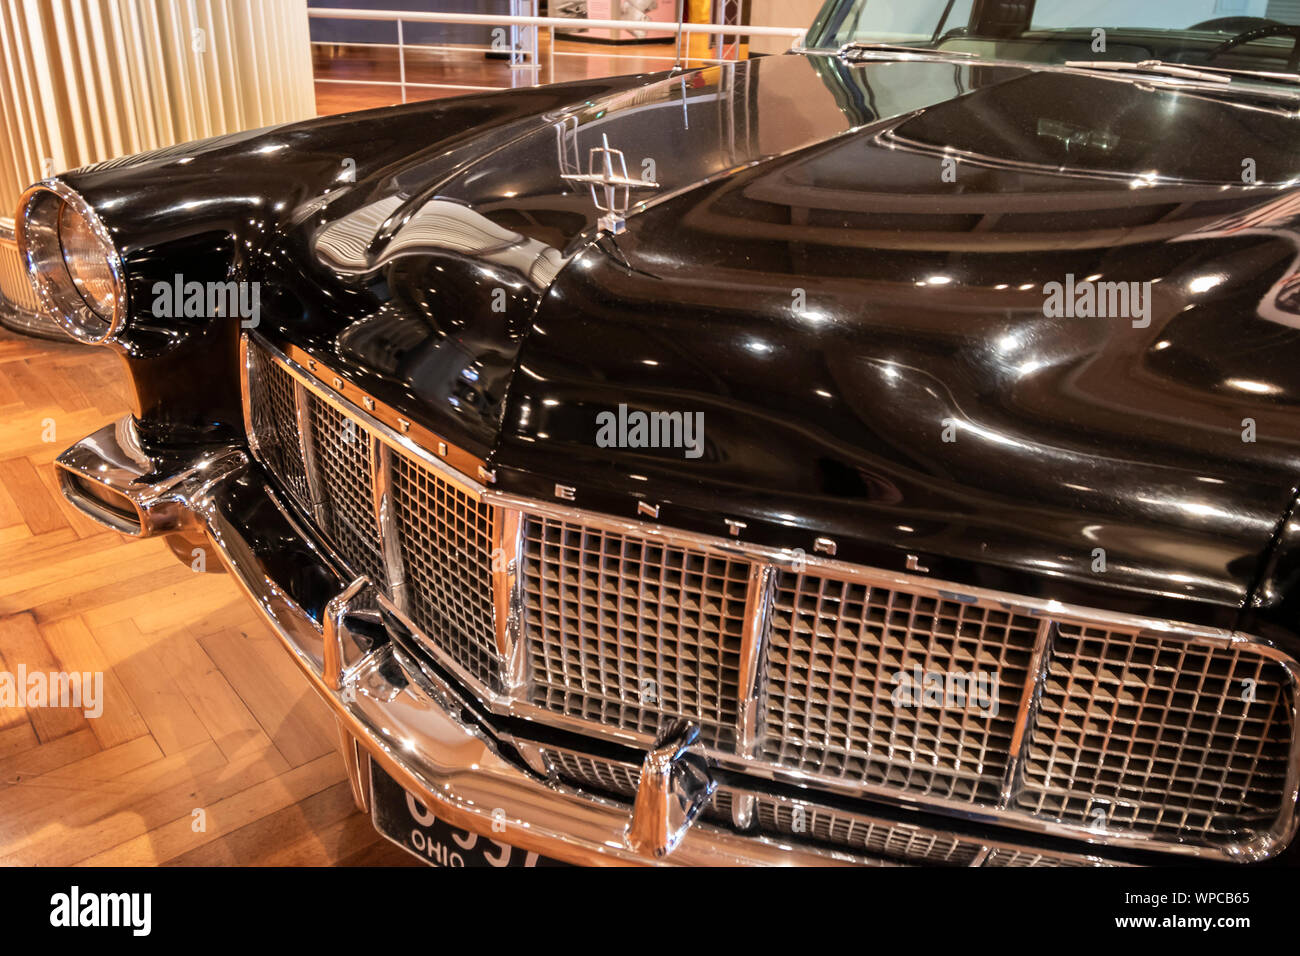 Dearborn, Mi, Usa - March 2019: The 1956 Continental Mark II sedan presented in the Henry Ford Museum of American Innovation. Stock Photo